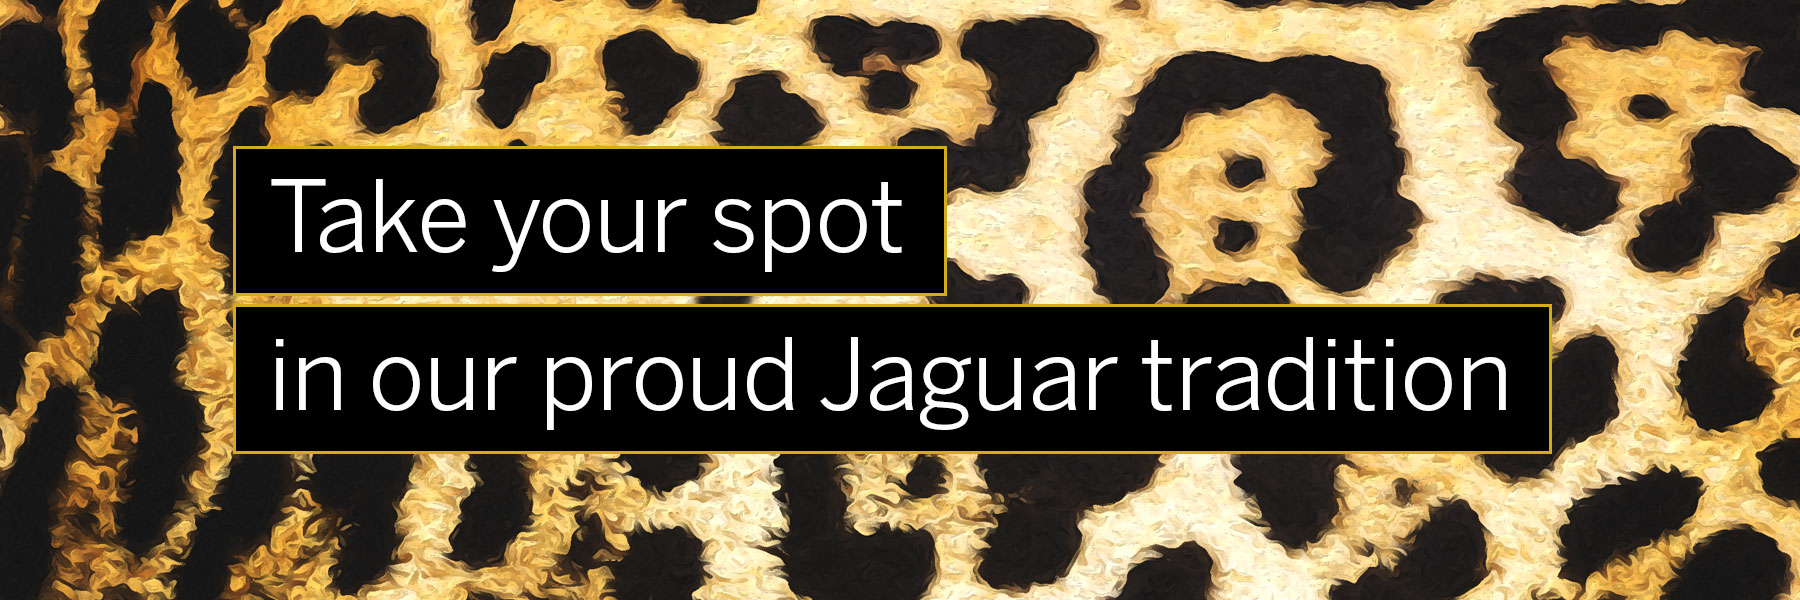 Take your spot in our proud Jaguar tradition